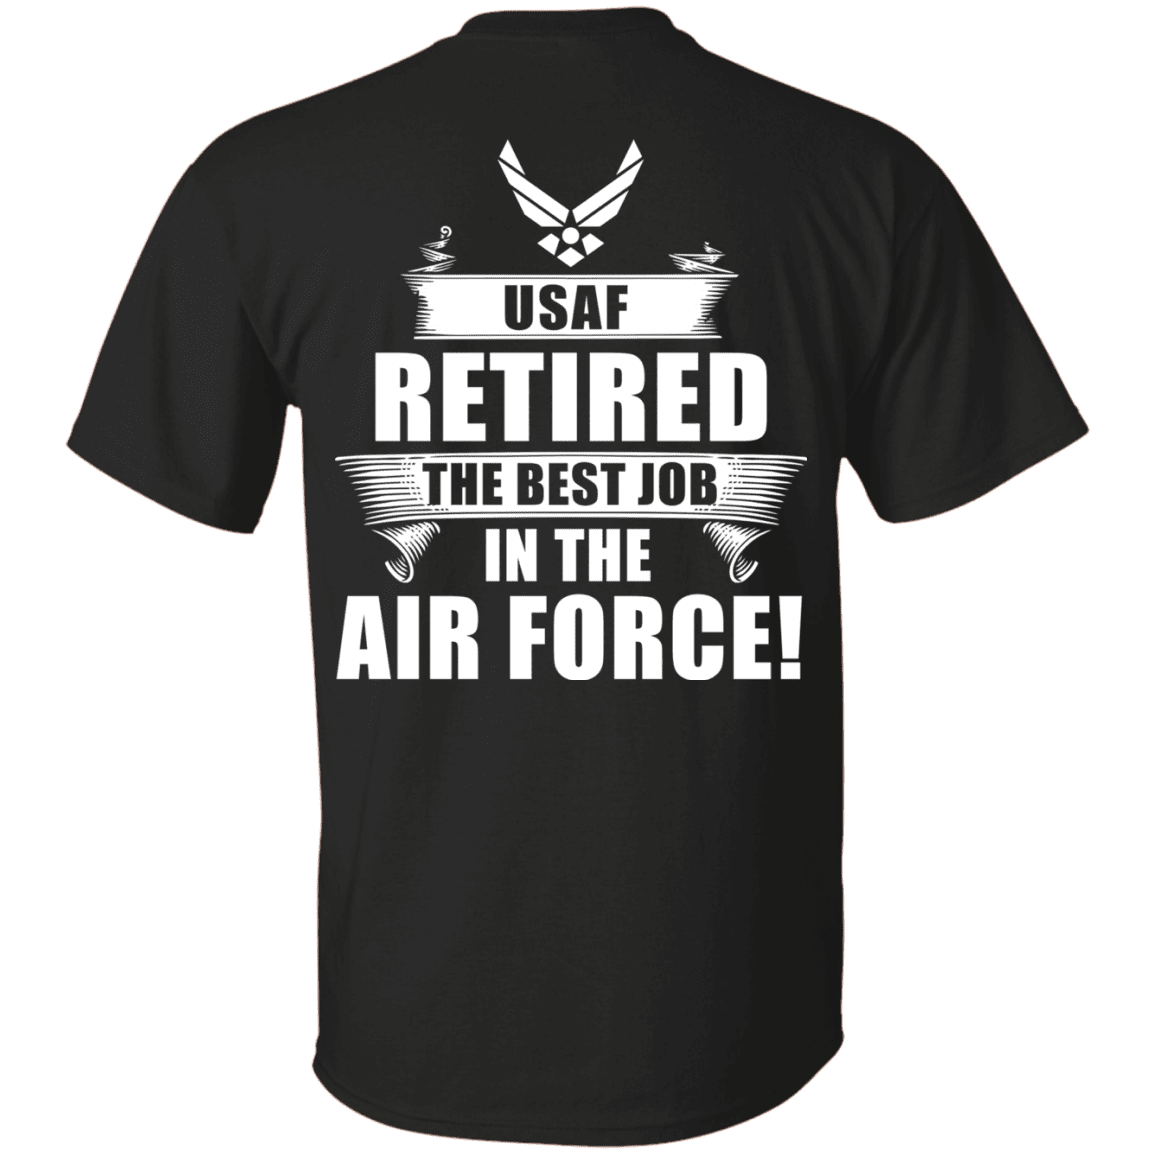 Retired The Best Job in The Air Force Back T Shirts-TShirt-USAF-Veterans Nation